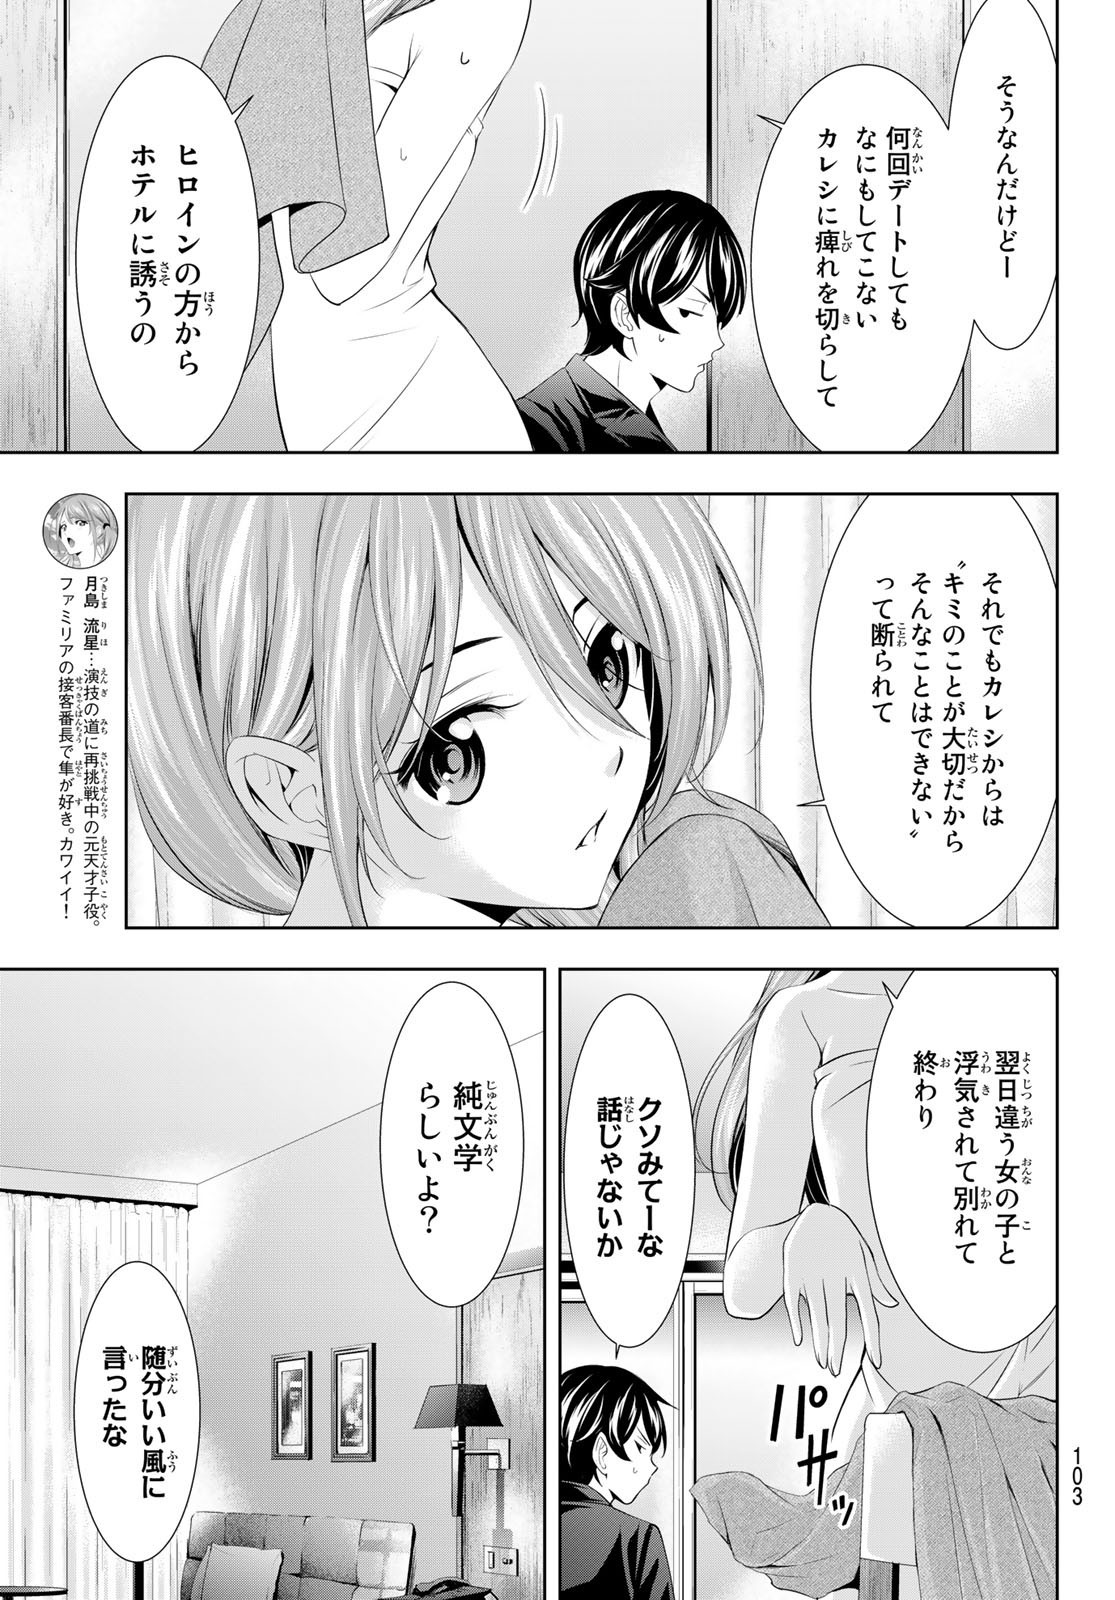 Goddess-Cafe-Terrace - Chapter 098 - Page 3